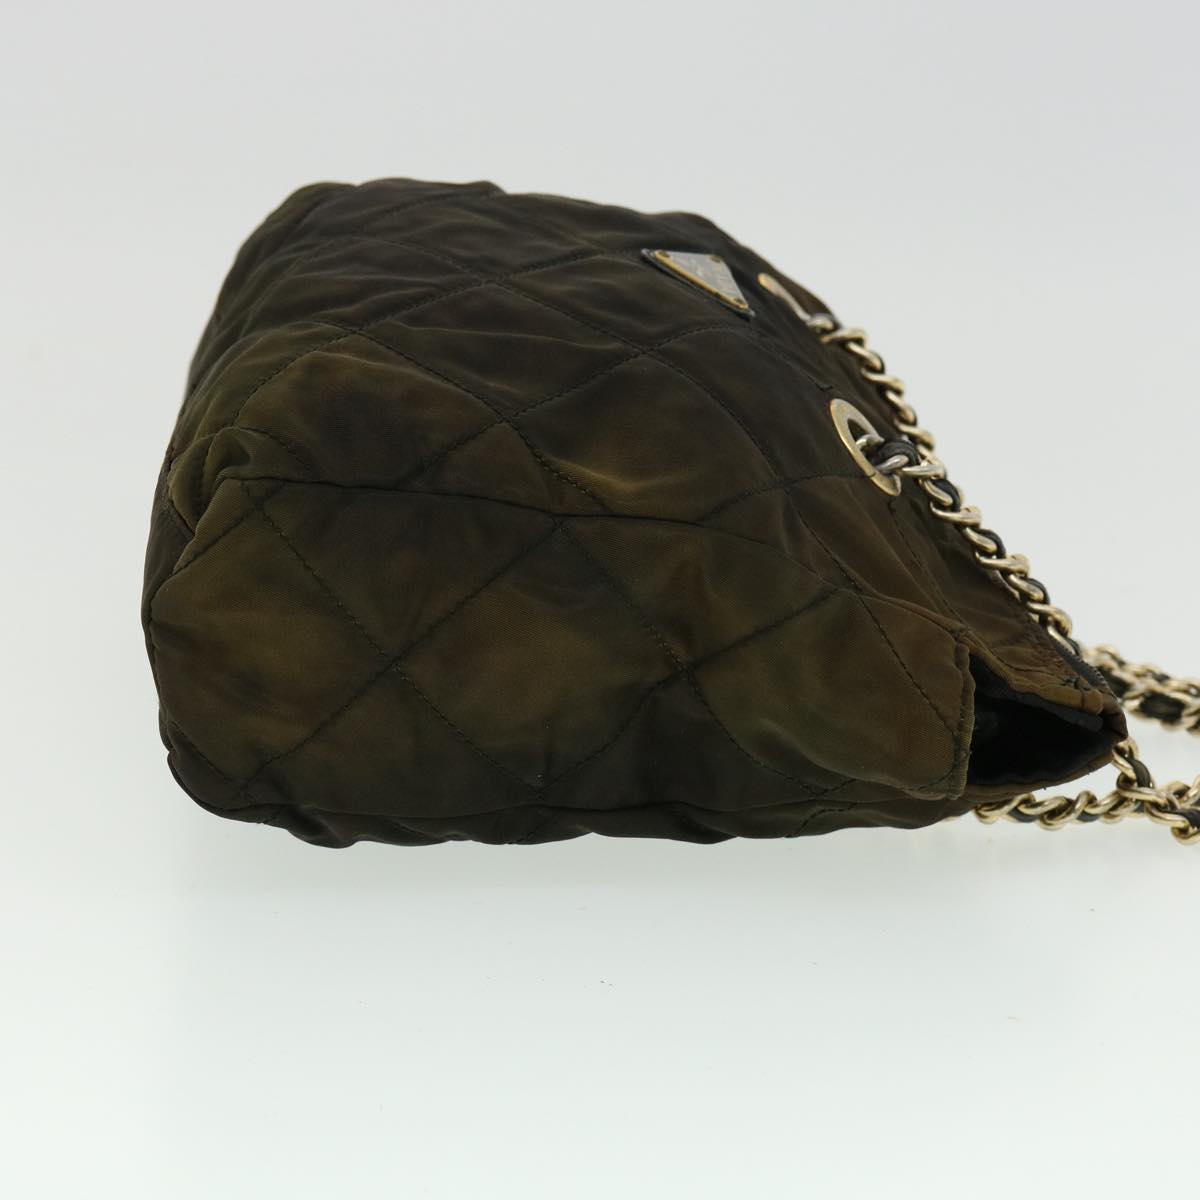 PRADA Quilted Chain Shoulder Bag Nylon Brown Auth ar7474